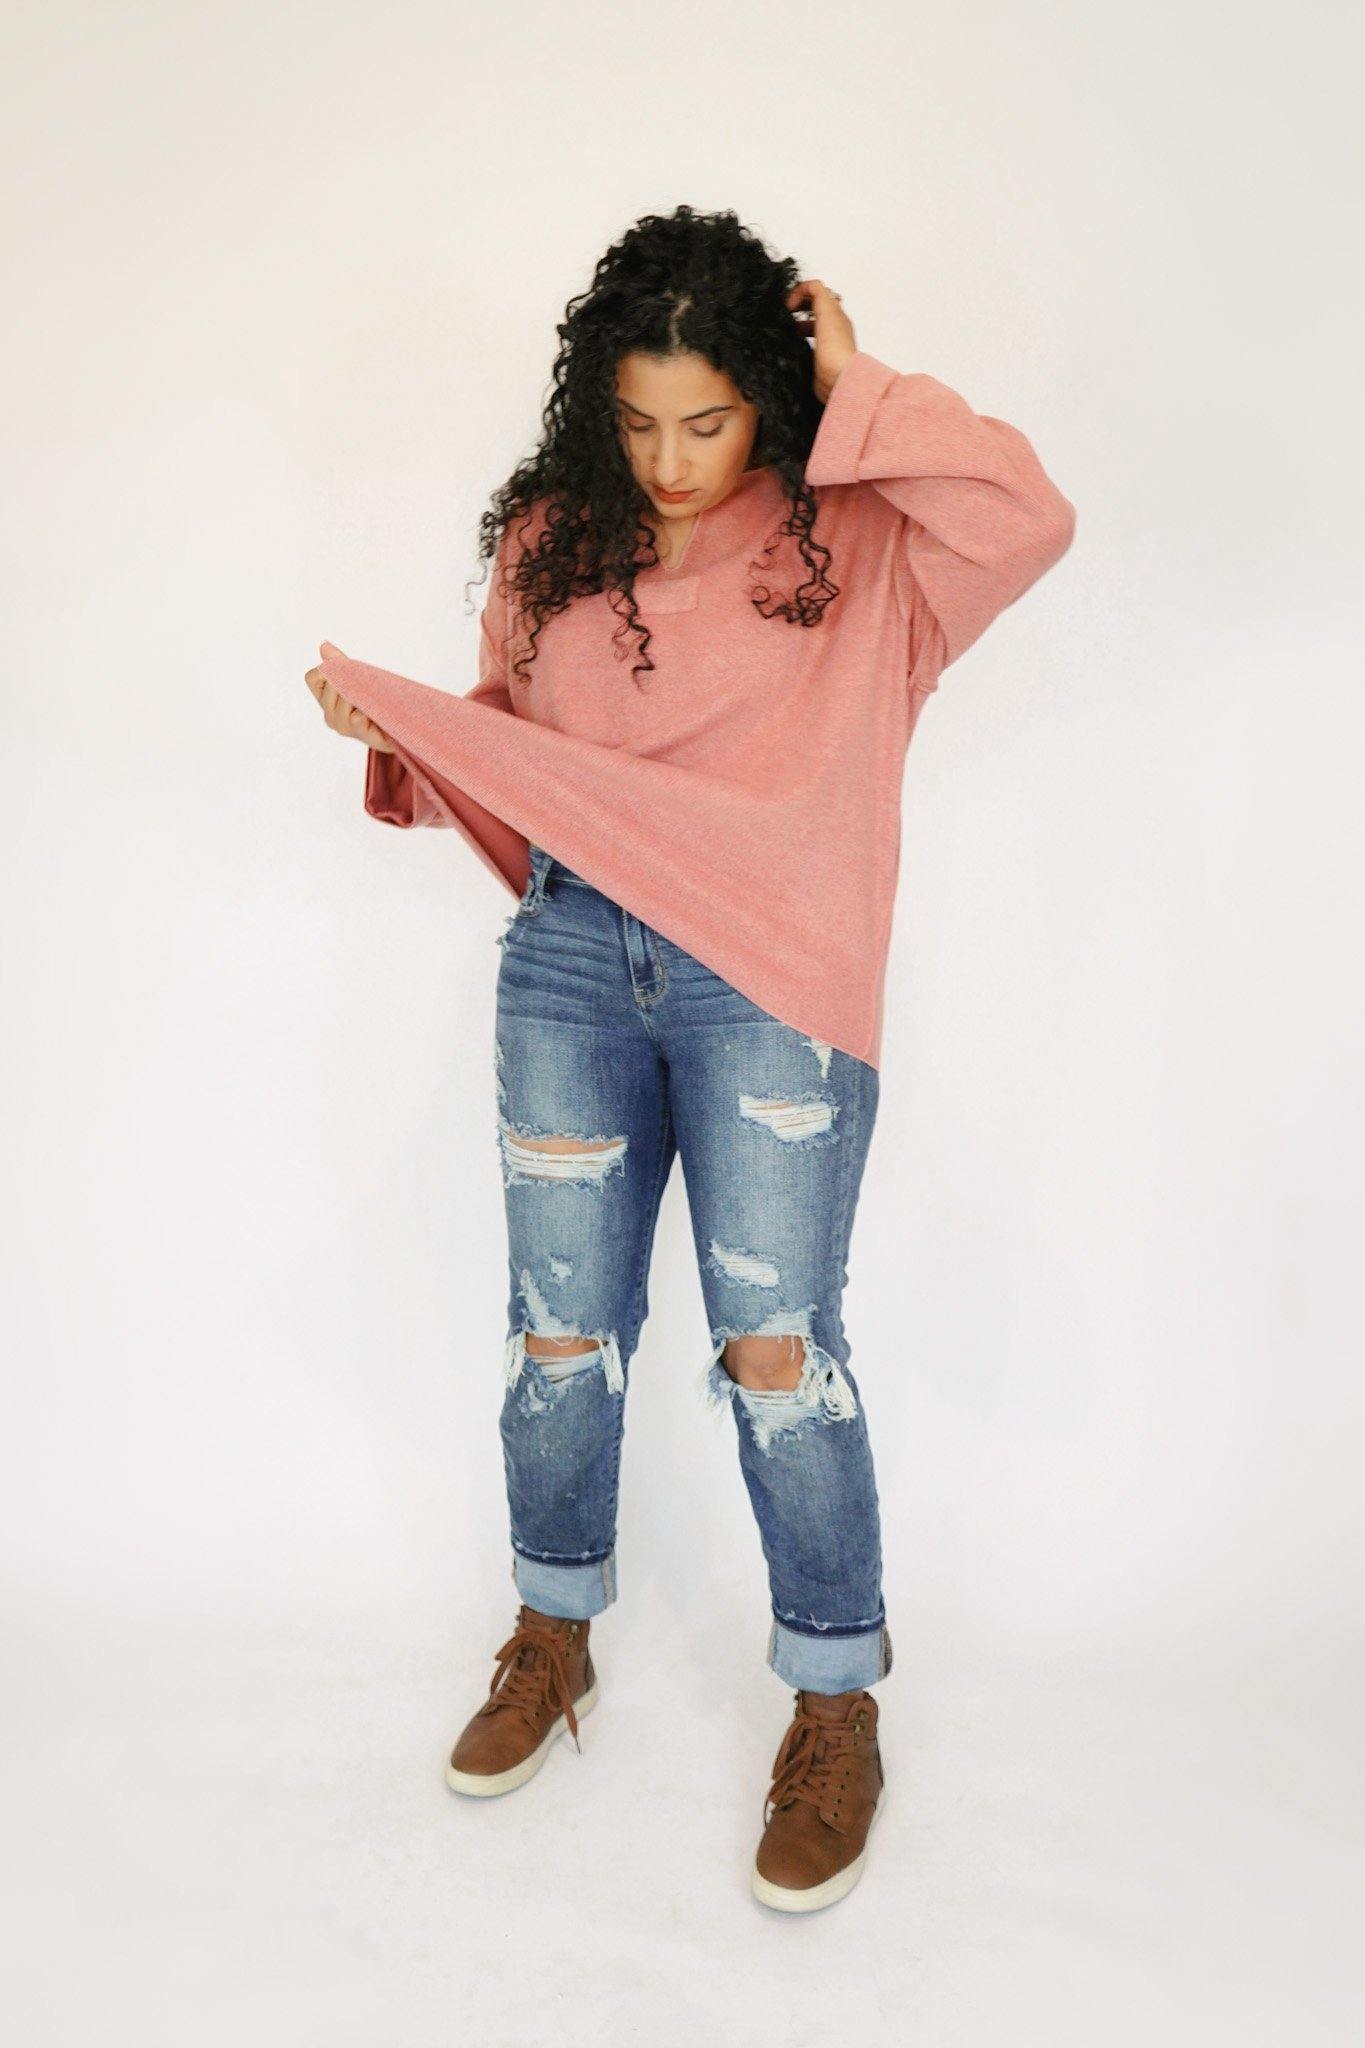 Danica Slouchy Pullover - Good Morrow Co